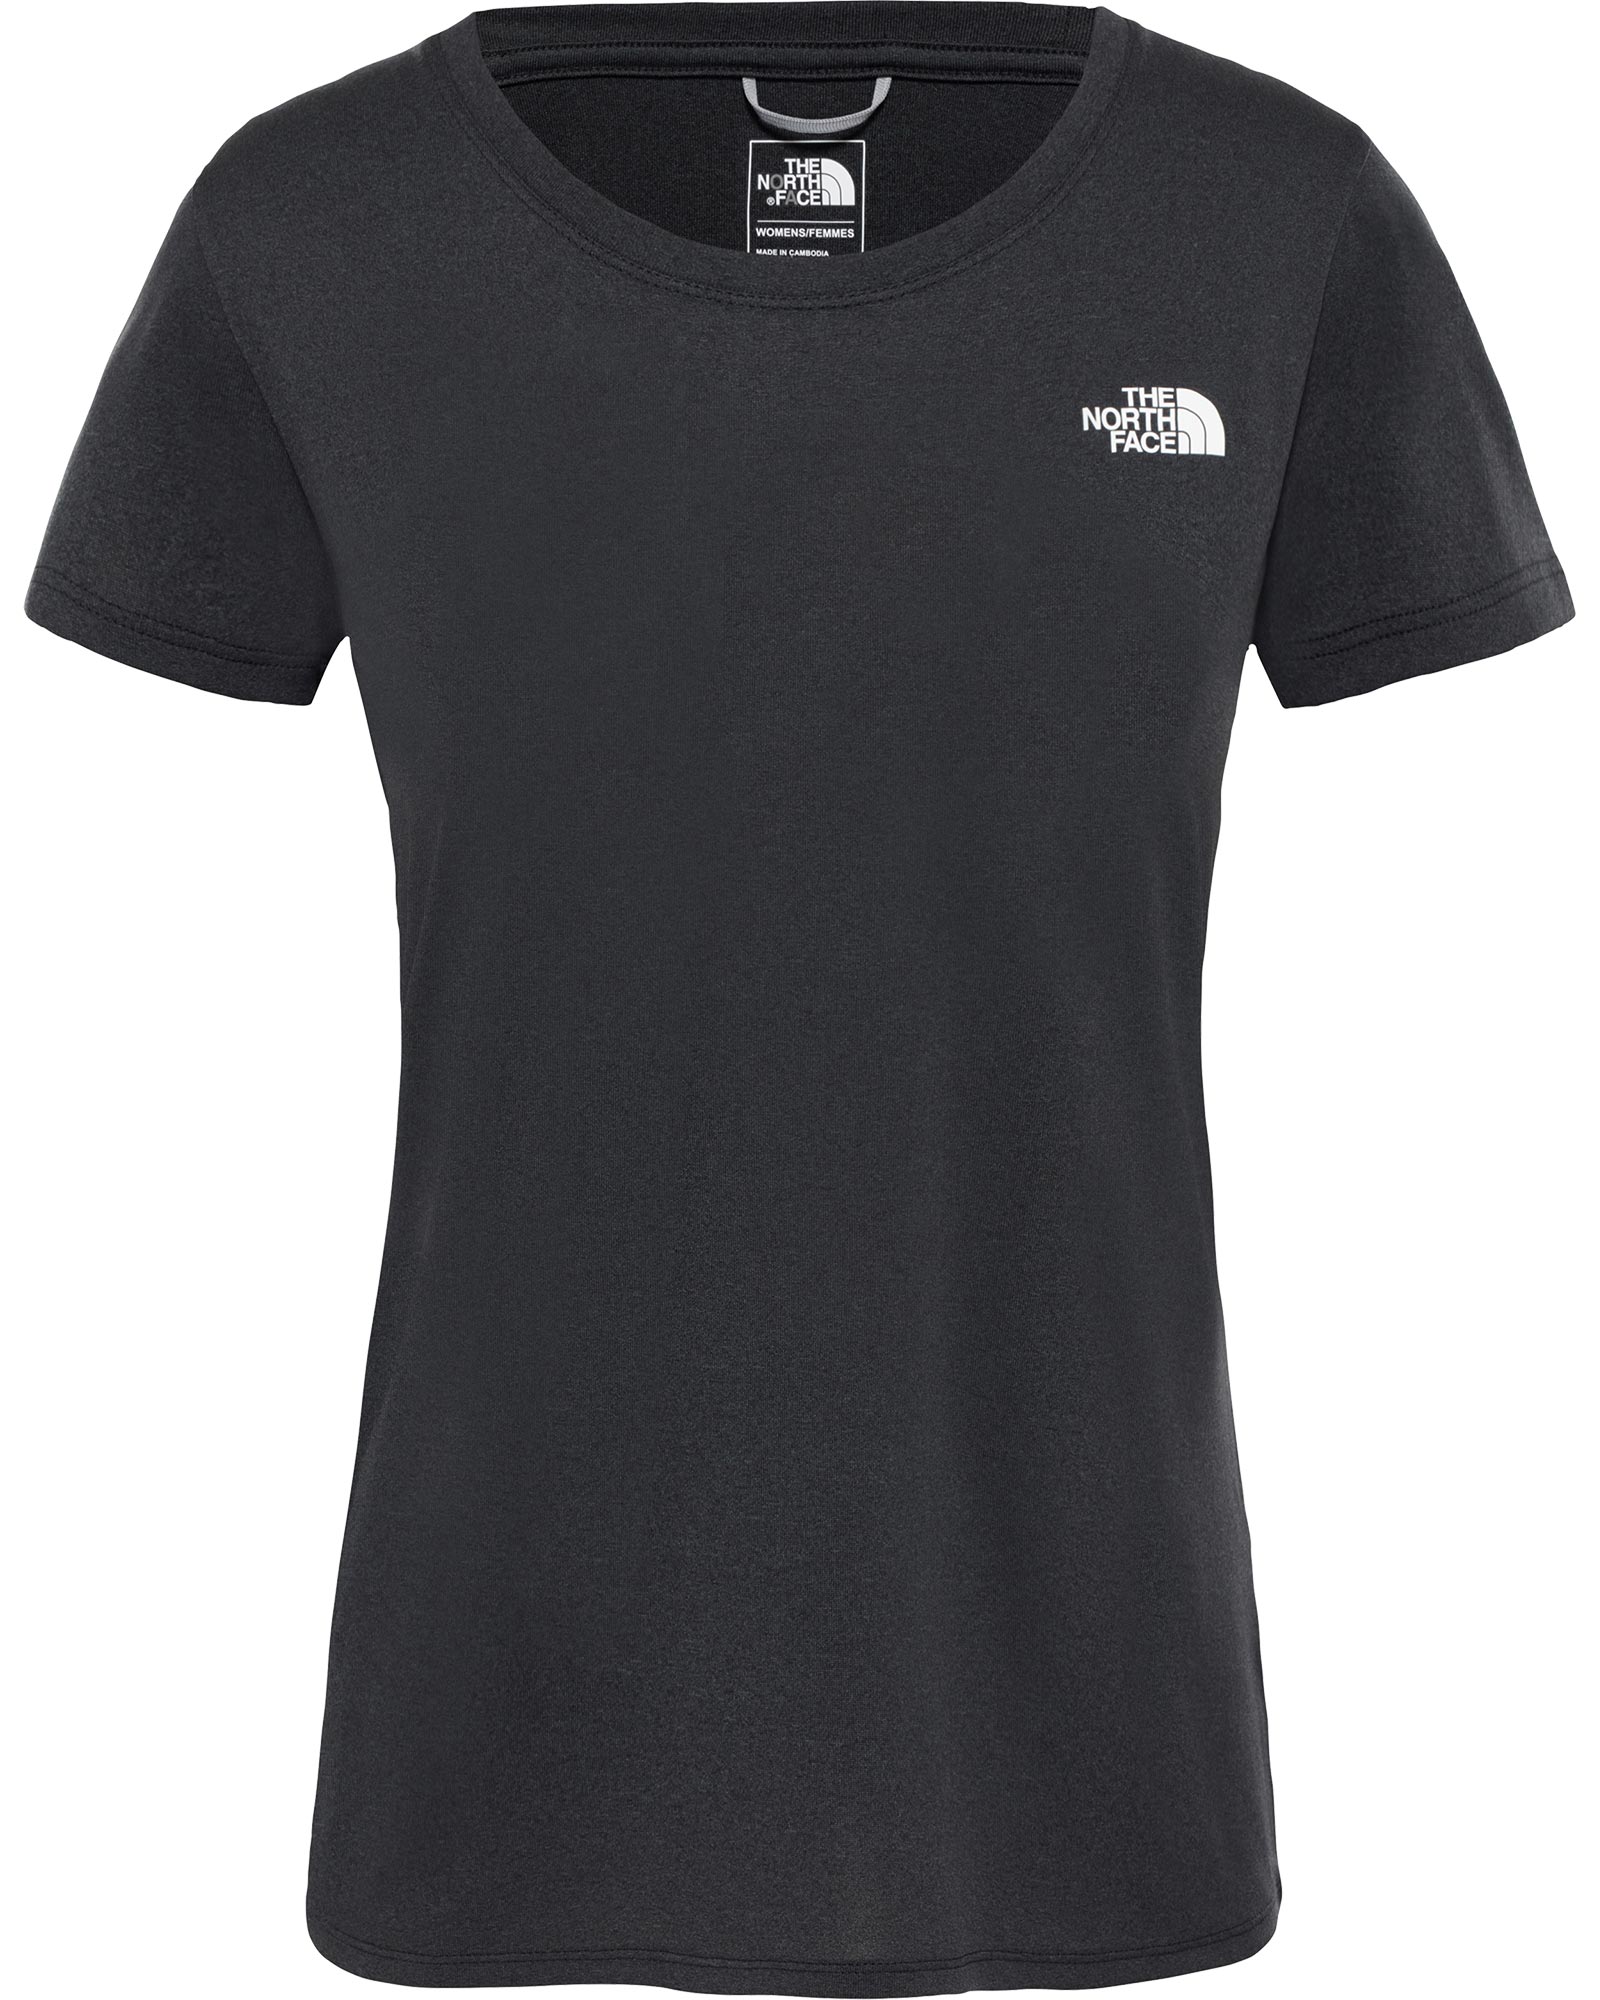 The North Face Reaxion Amp Women’s Crew T Shirt - TNF Black Heather L